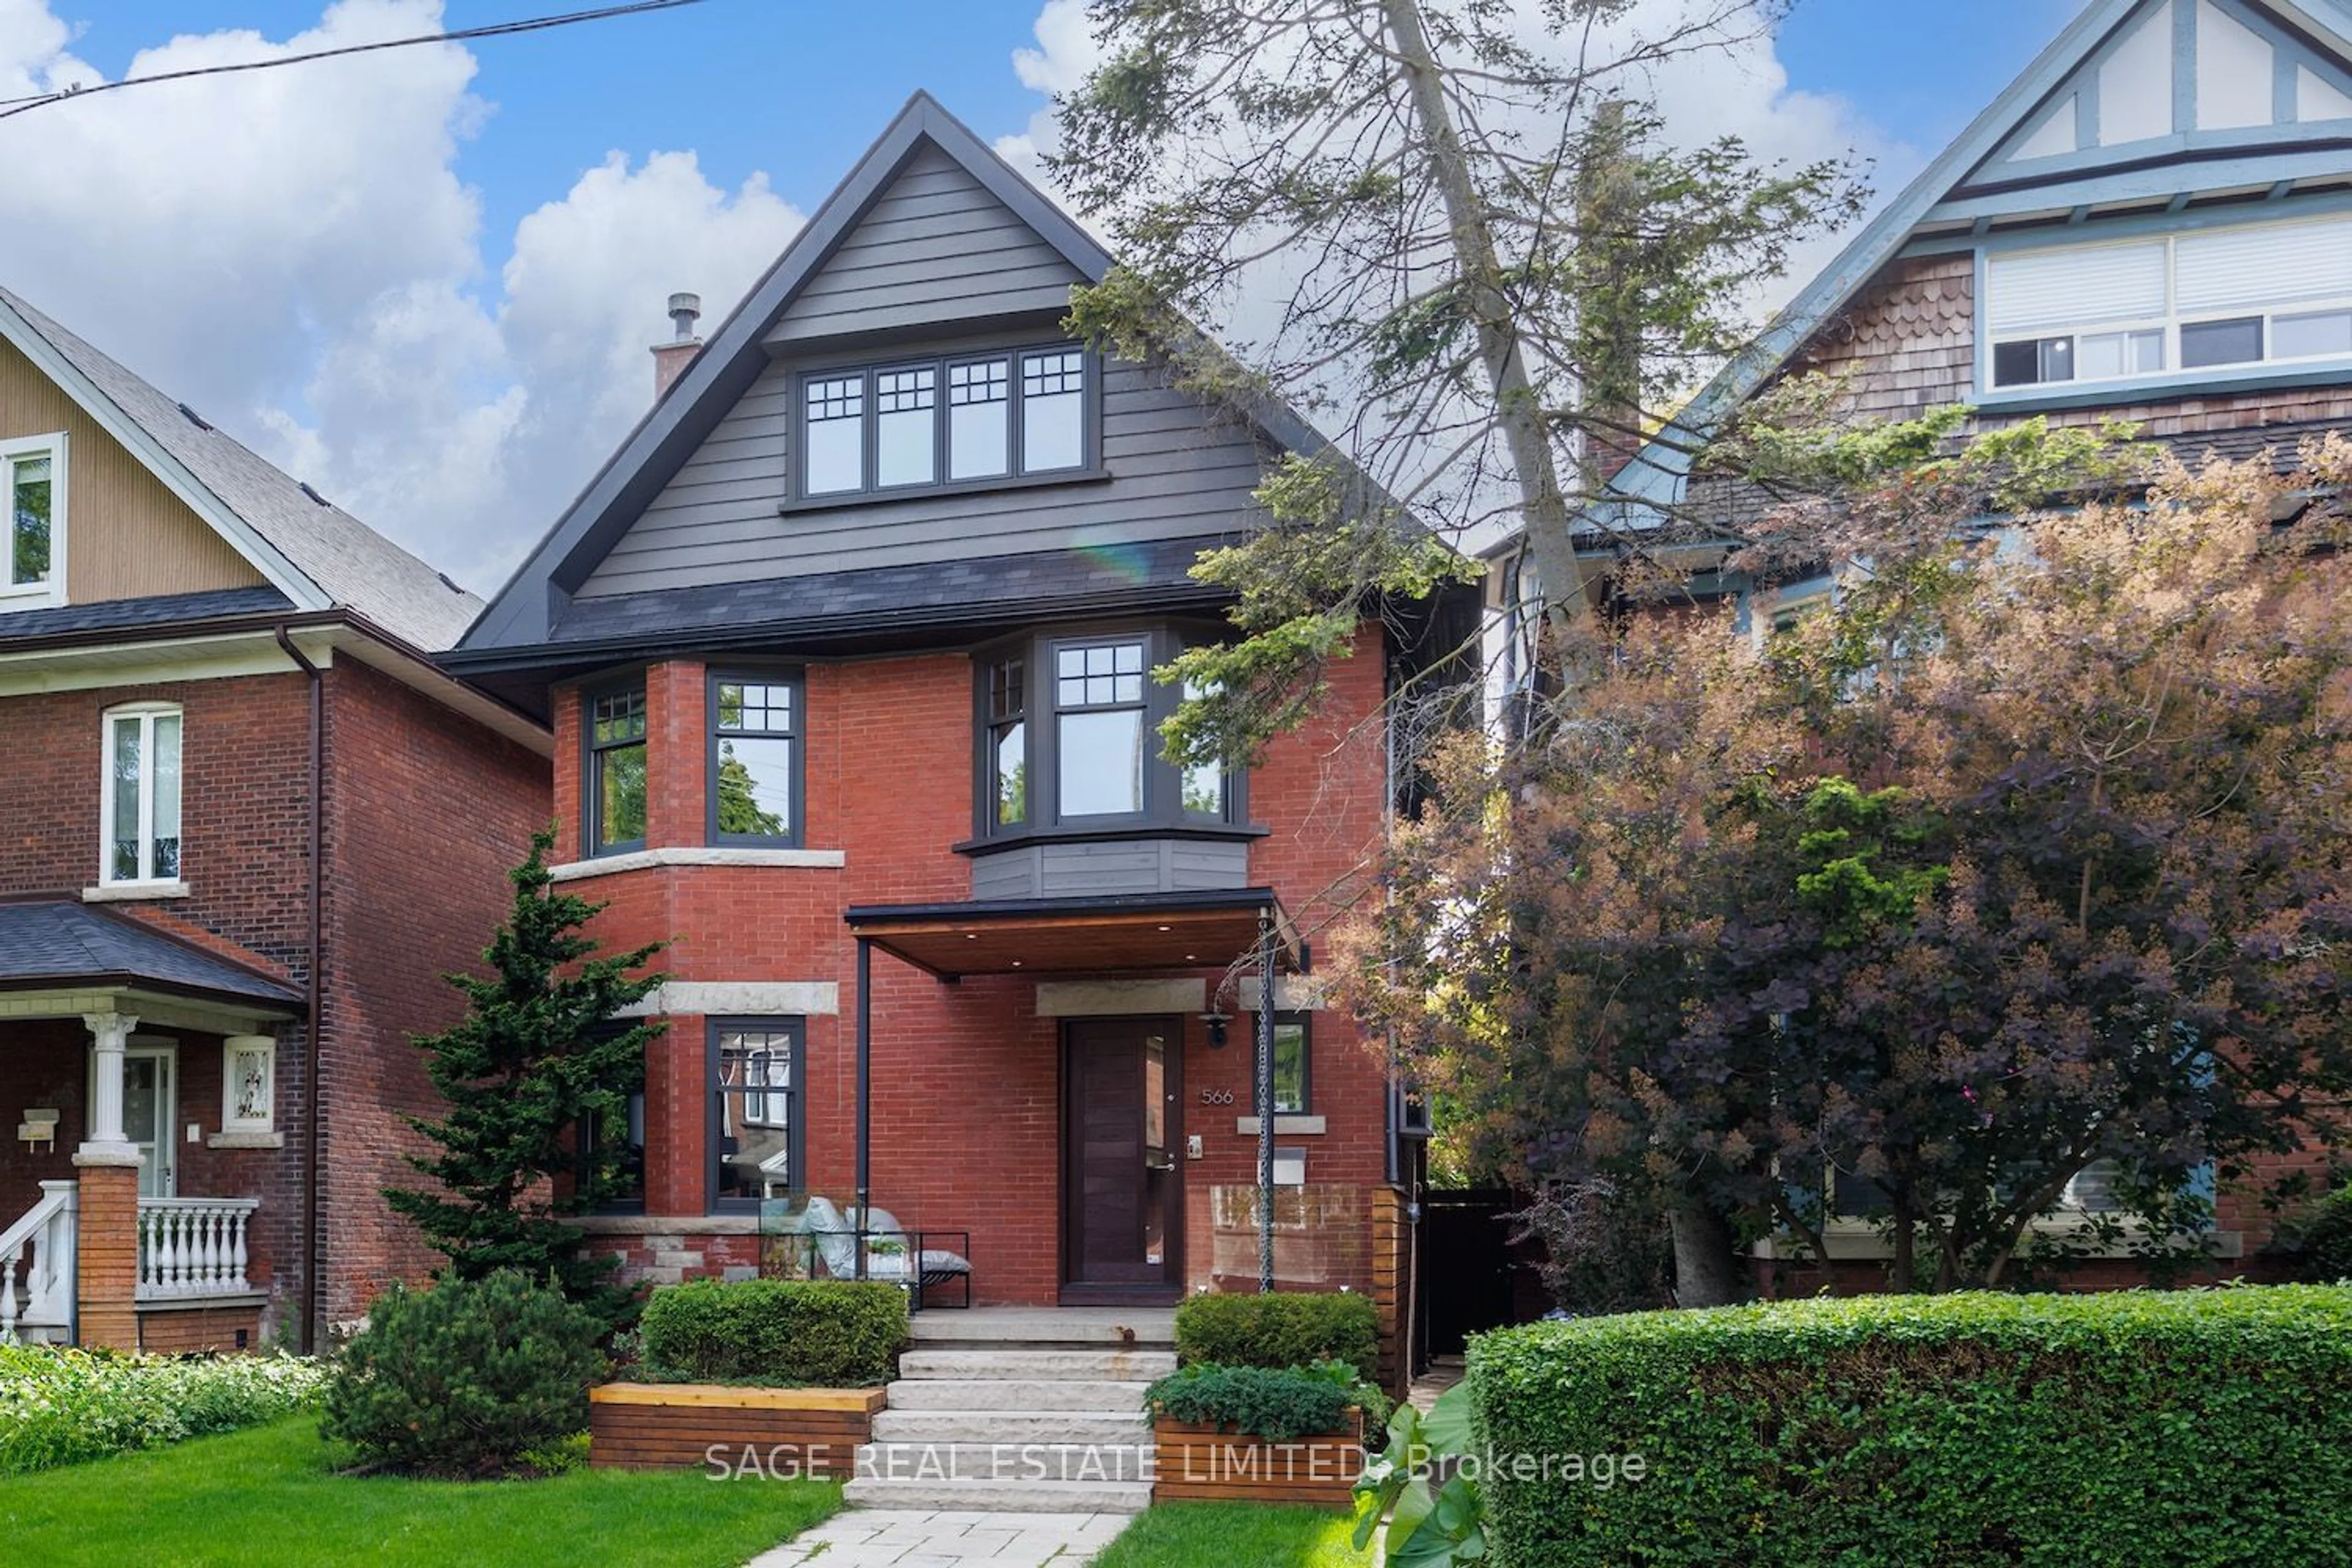 Home with brick exterior material for 566 Dovercourt Rd, Toronto Ontario M6H 2W6